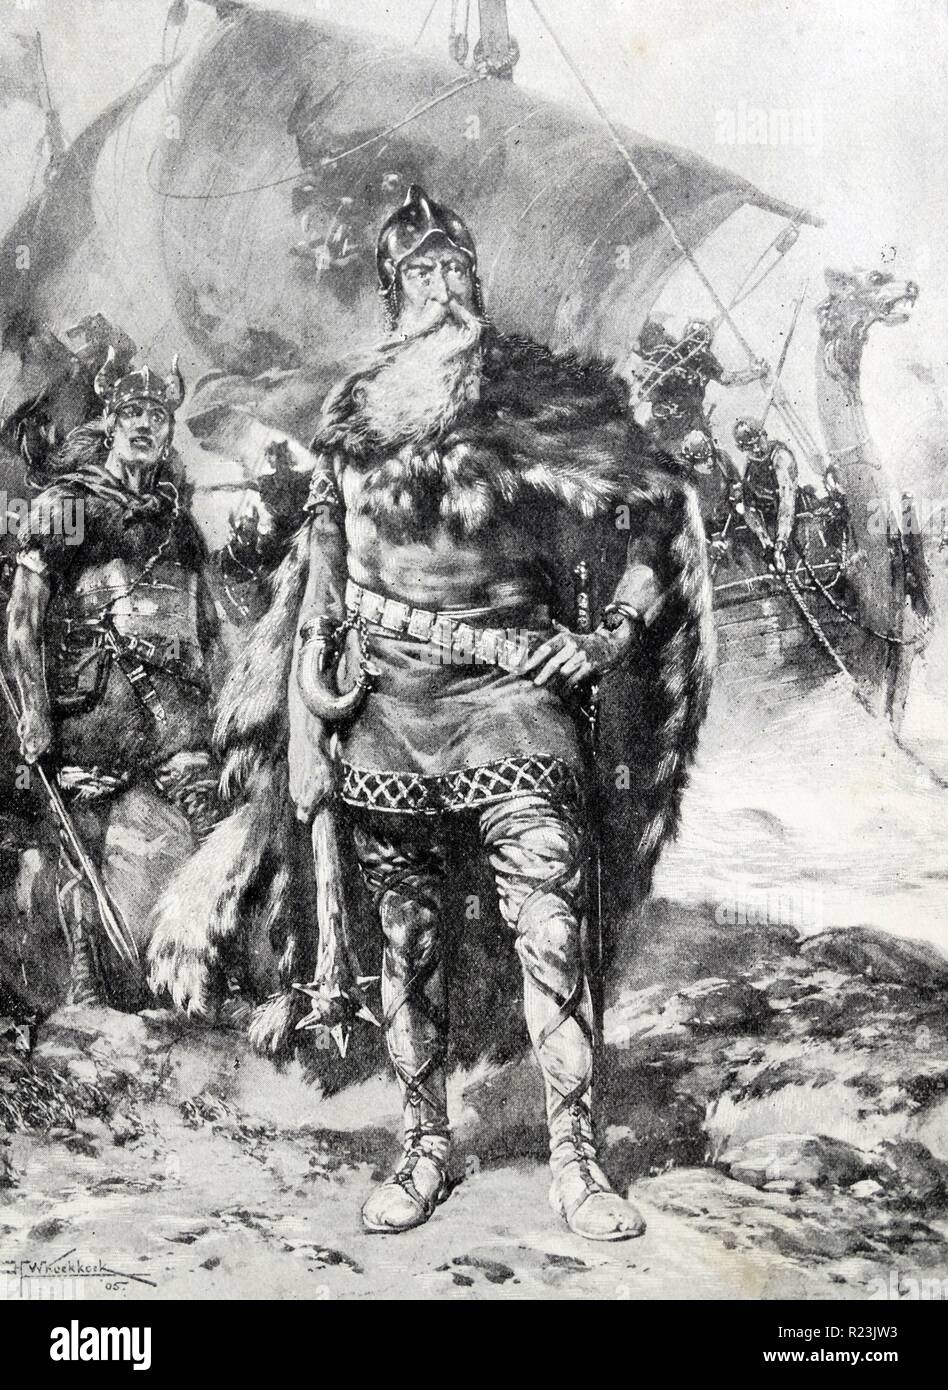 A Great Viking. From the picture by H. W. Koekkoek. Stock Photo